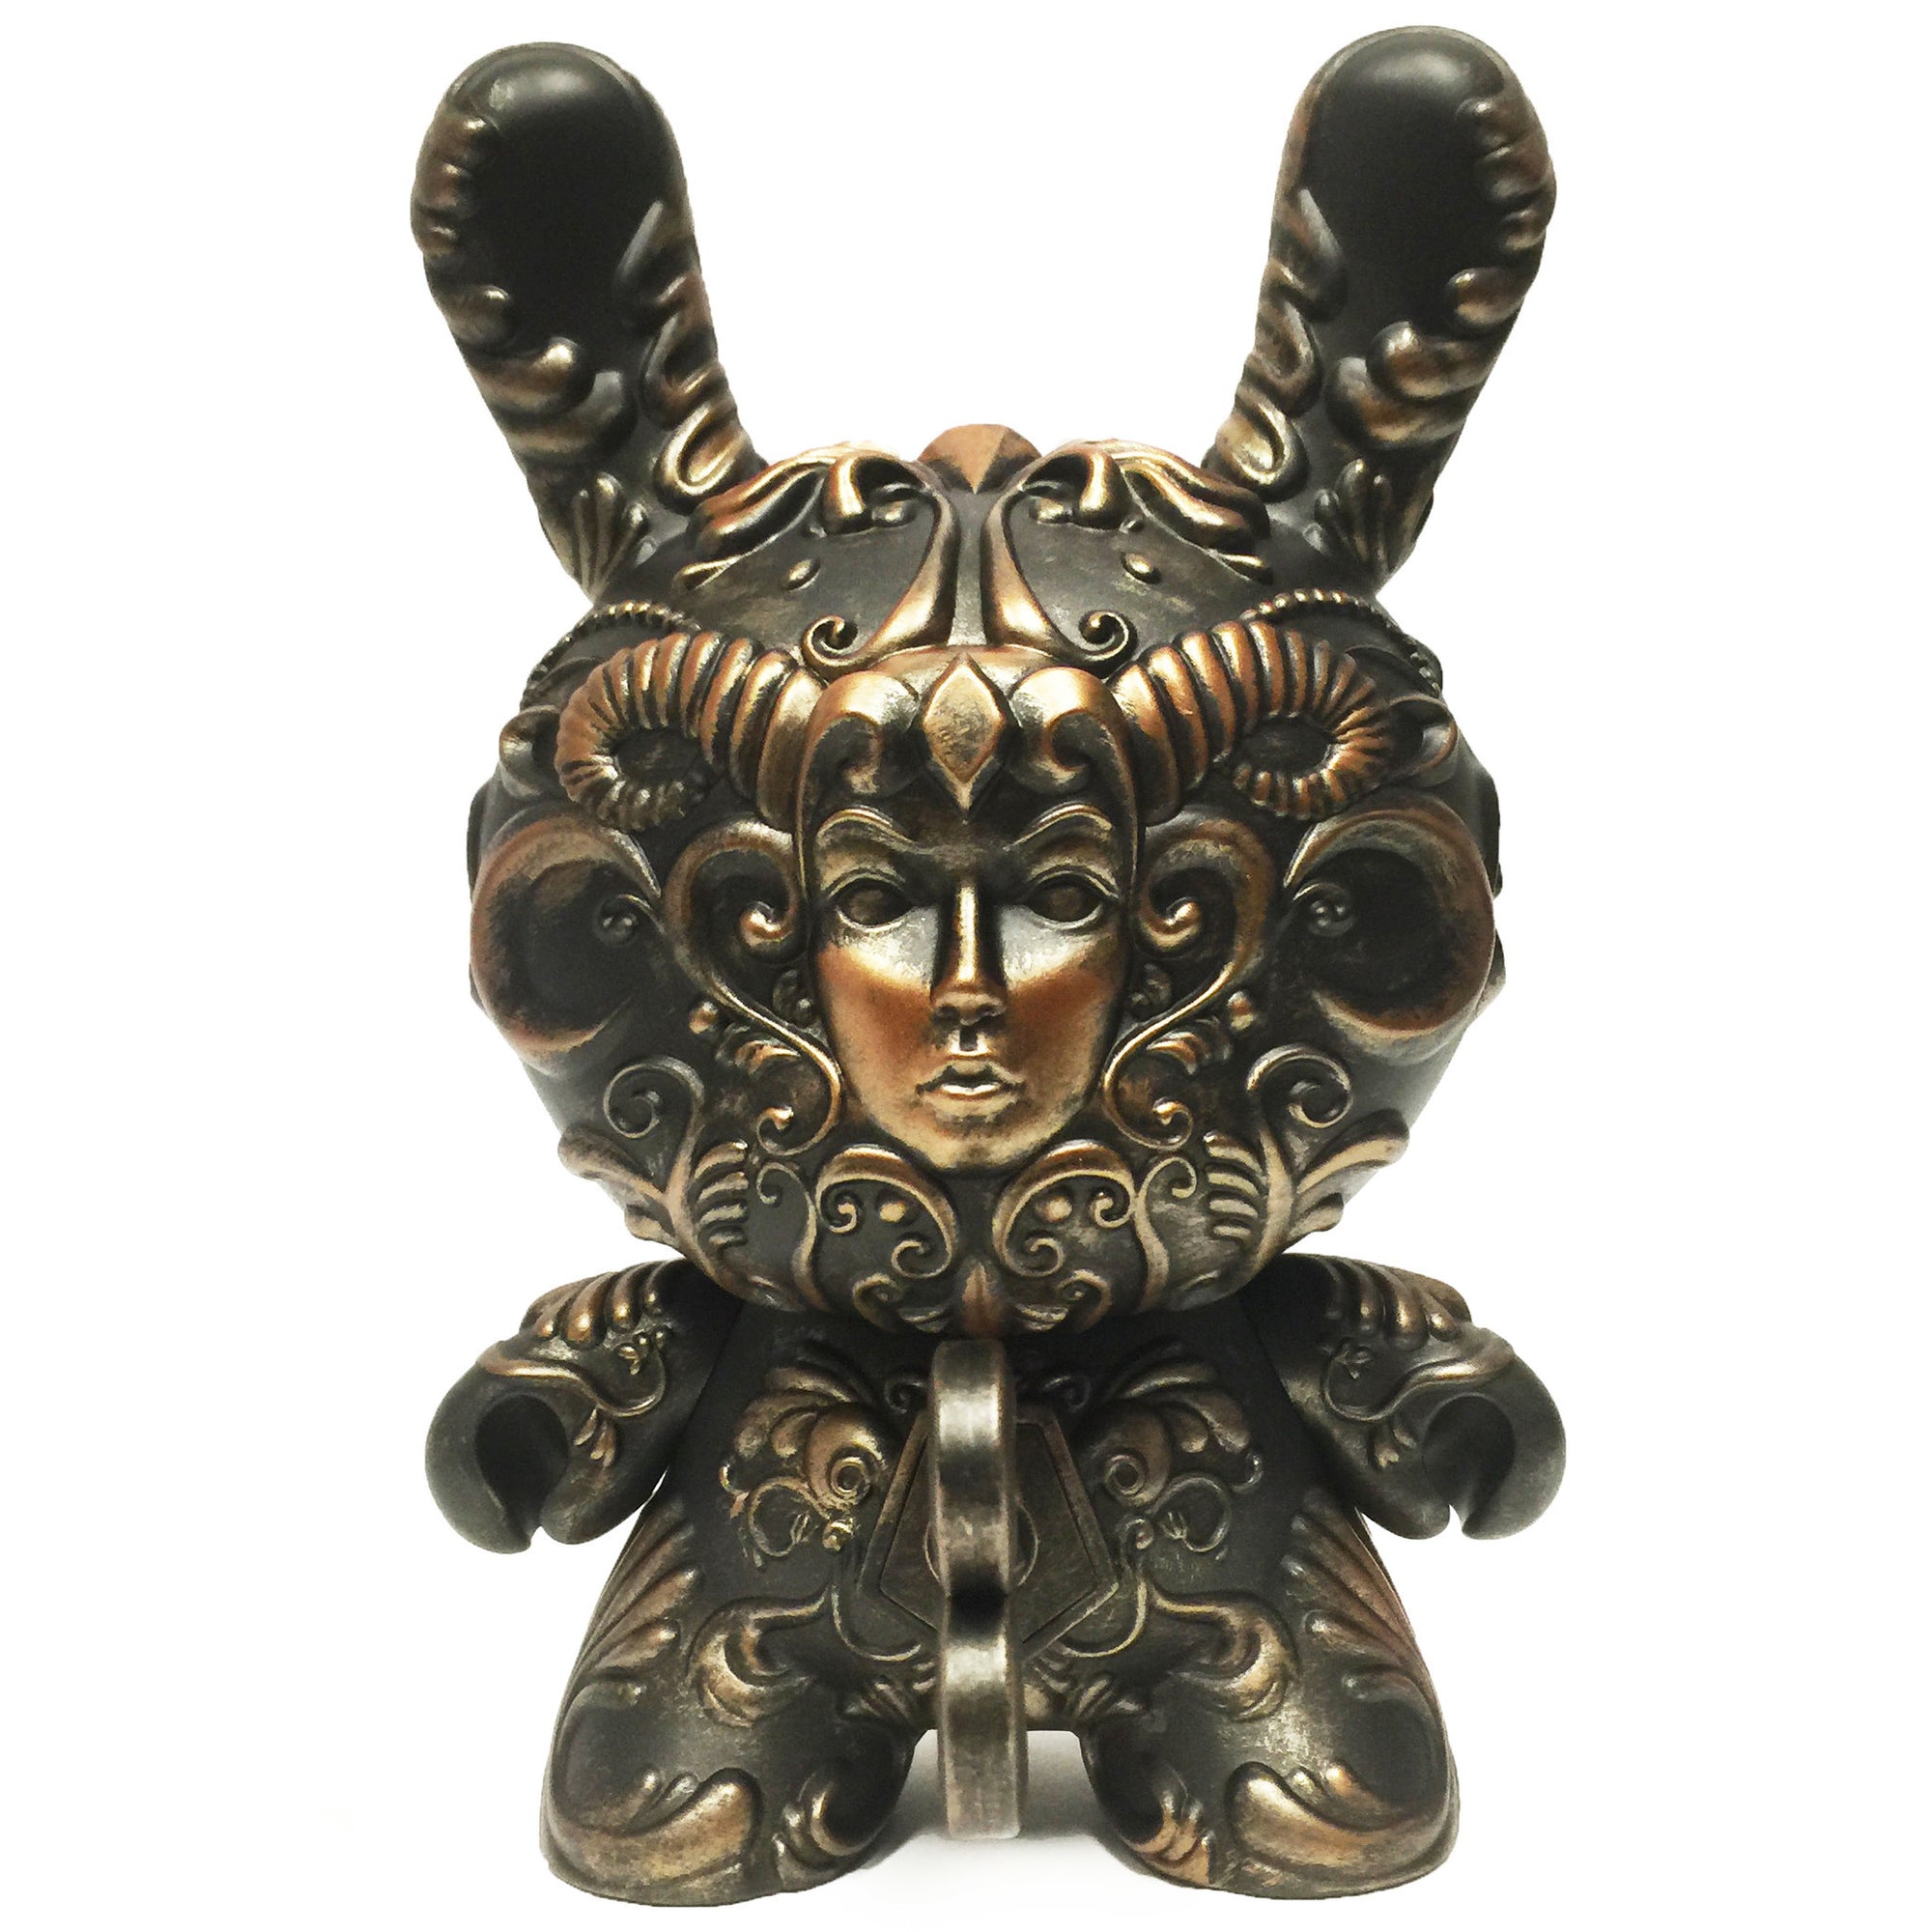 It's A Fad 8-inch Bronze Dunny by J*Ryu - Special Order - Mindzai  - 1